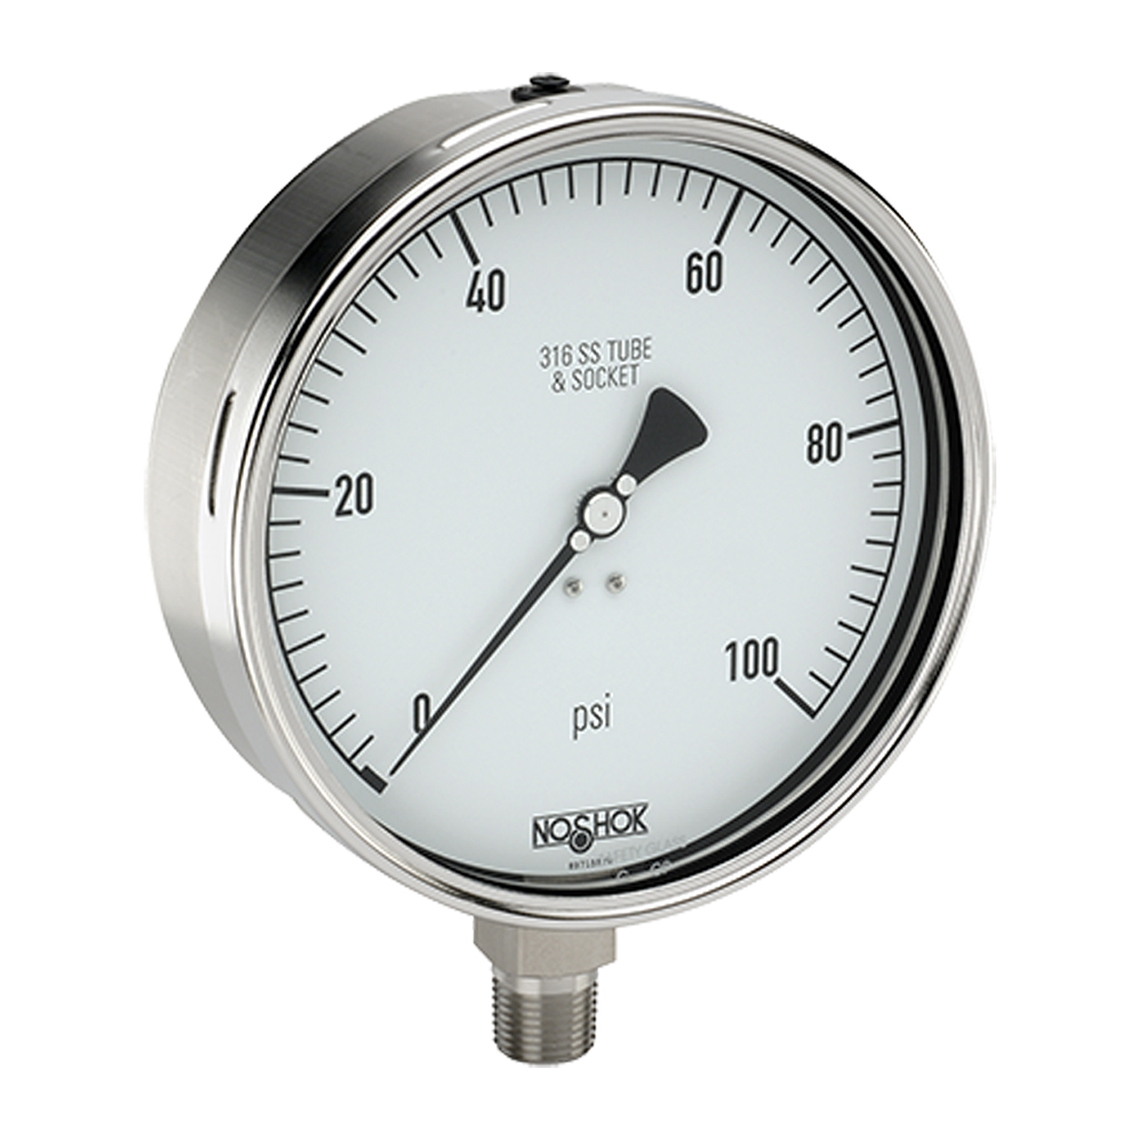 60-400-2000-psi/bar 400/500 Series All Stainless Steel Dry and Liquid Filled Pressure Gauges